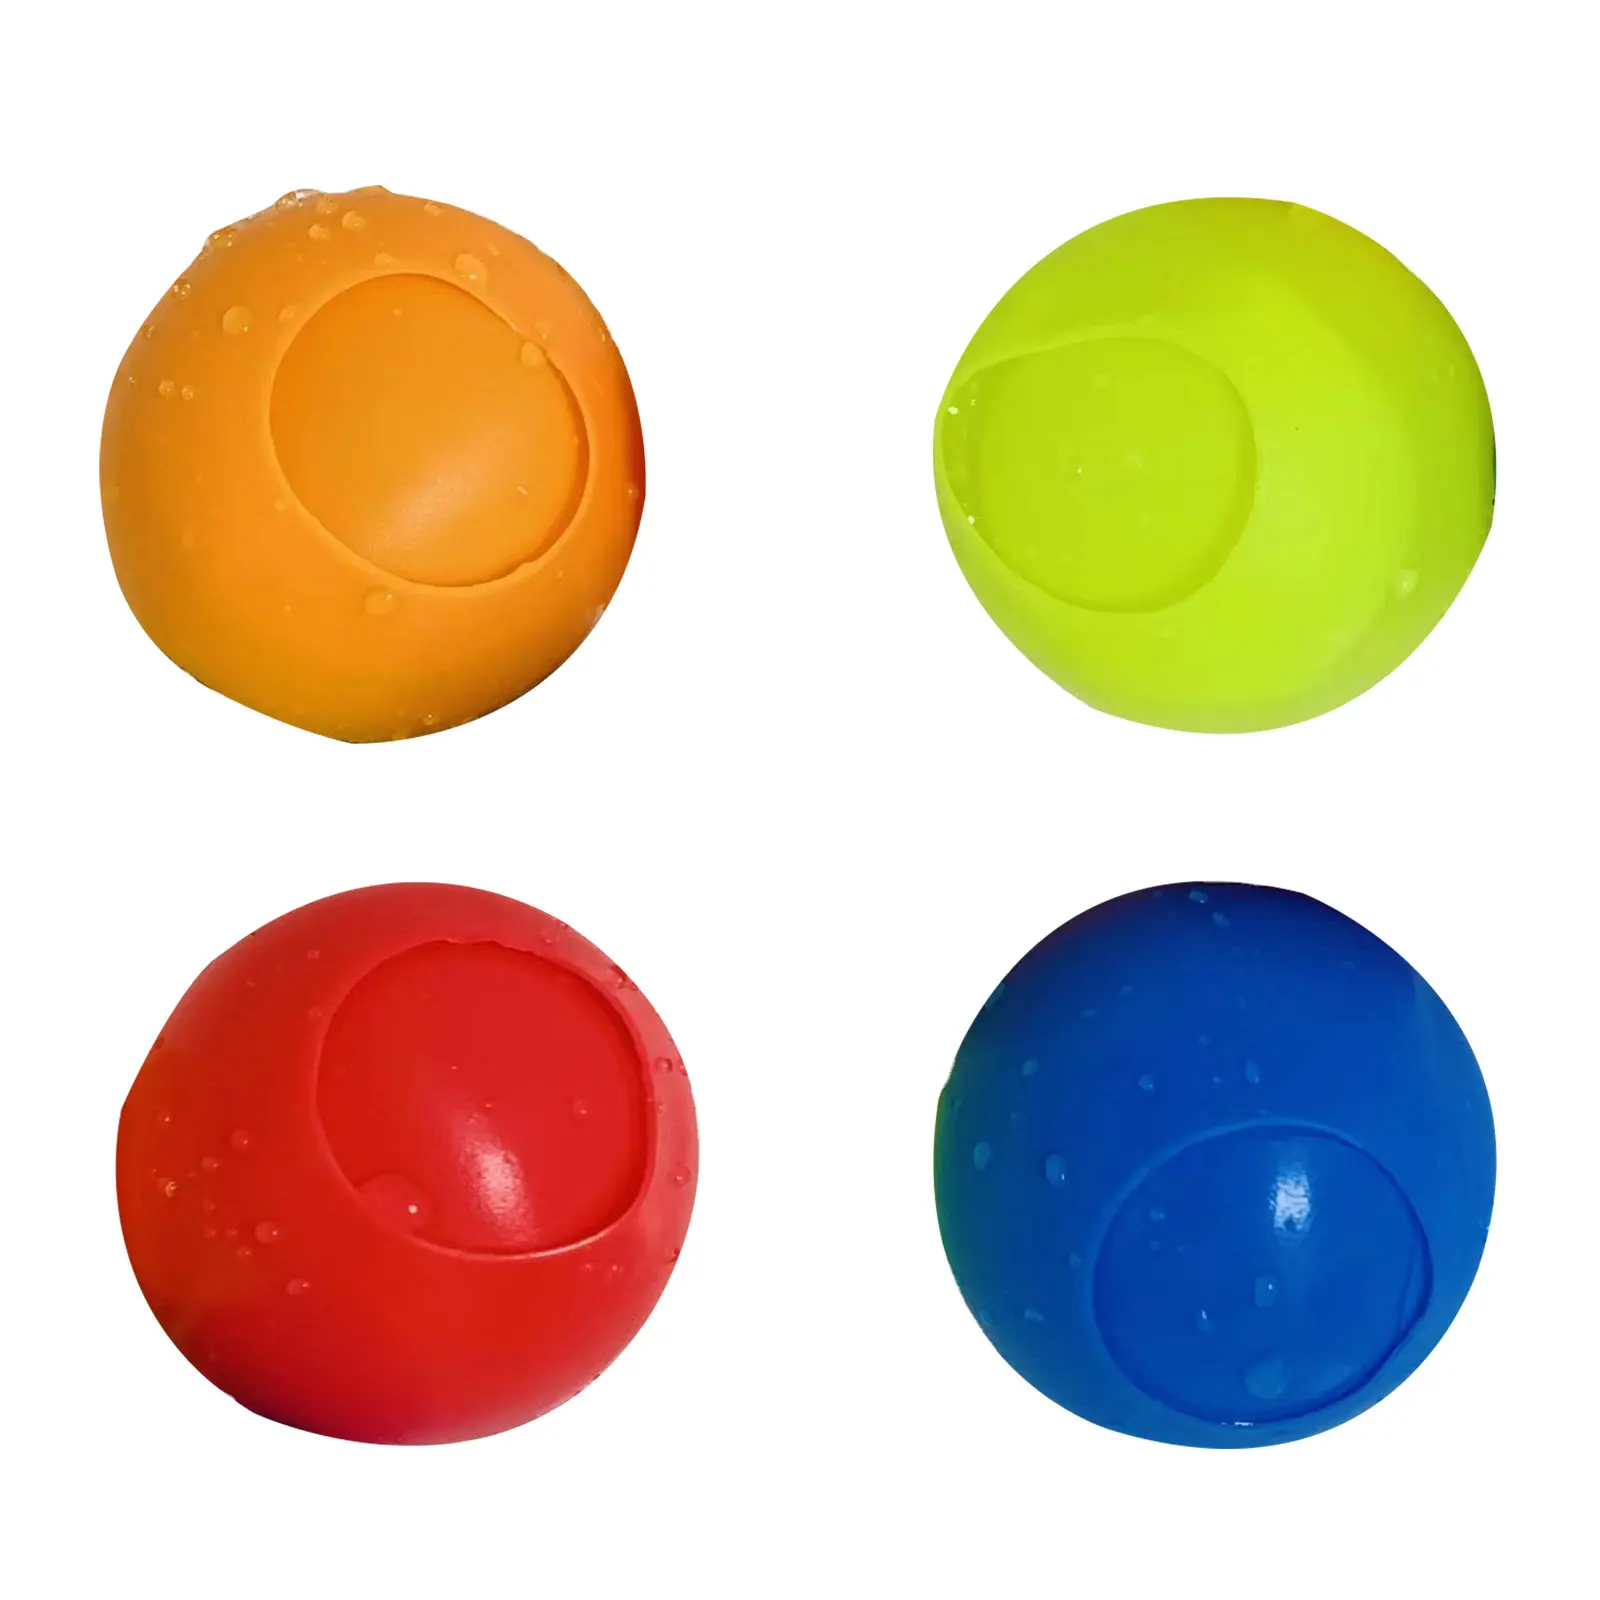 

Water Bomb Ball Reusable Water Balloons Absorbent Ball Outdoor Pool Beach Play Toy Party Favors Water Fight Games Summer 1pc